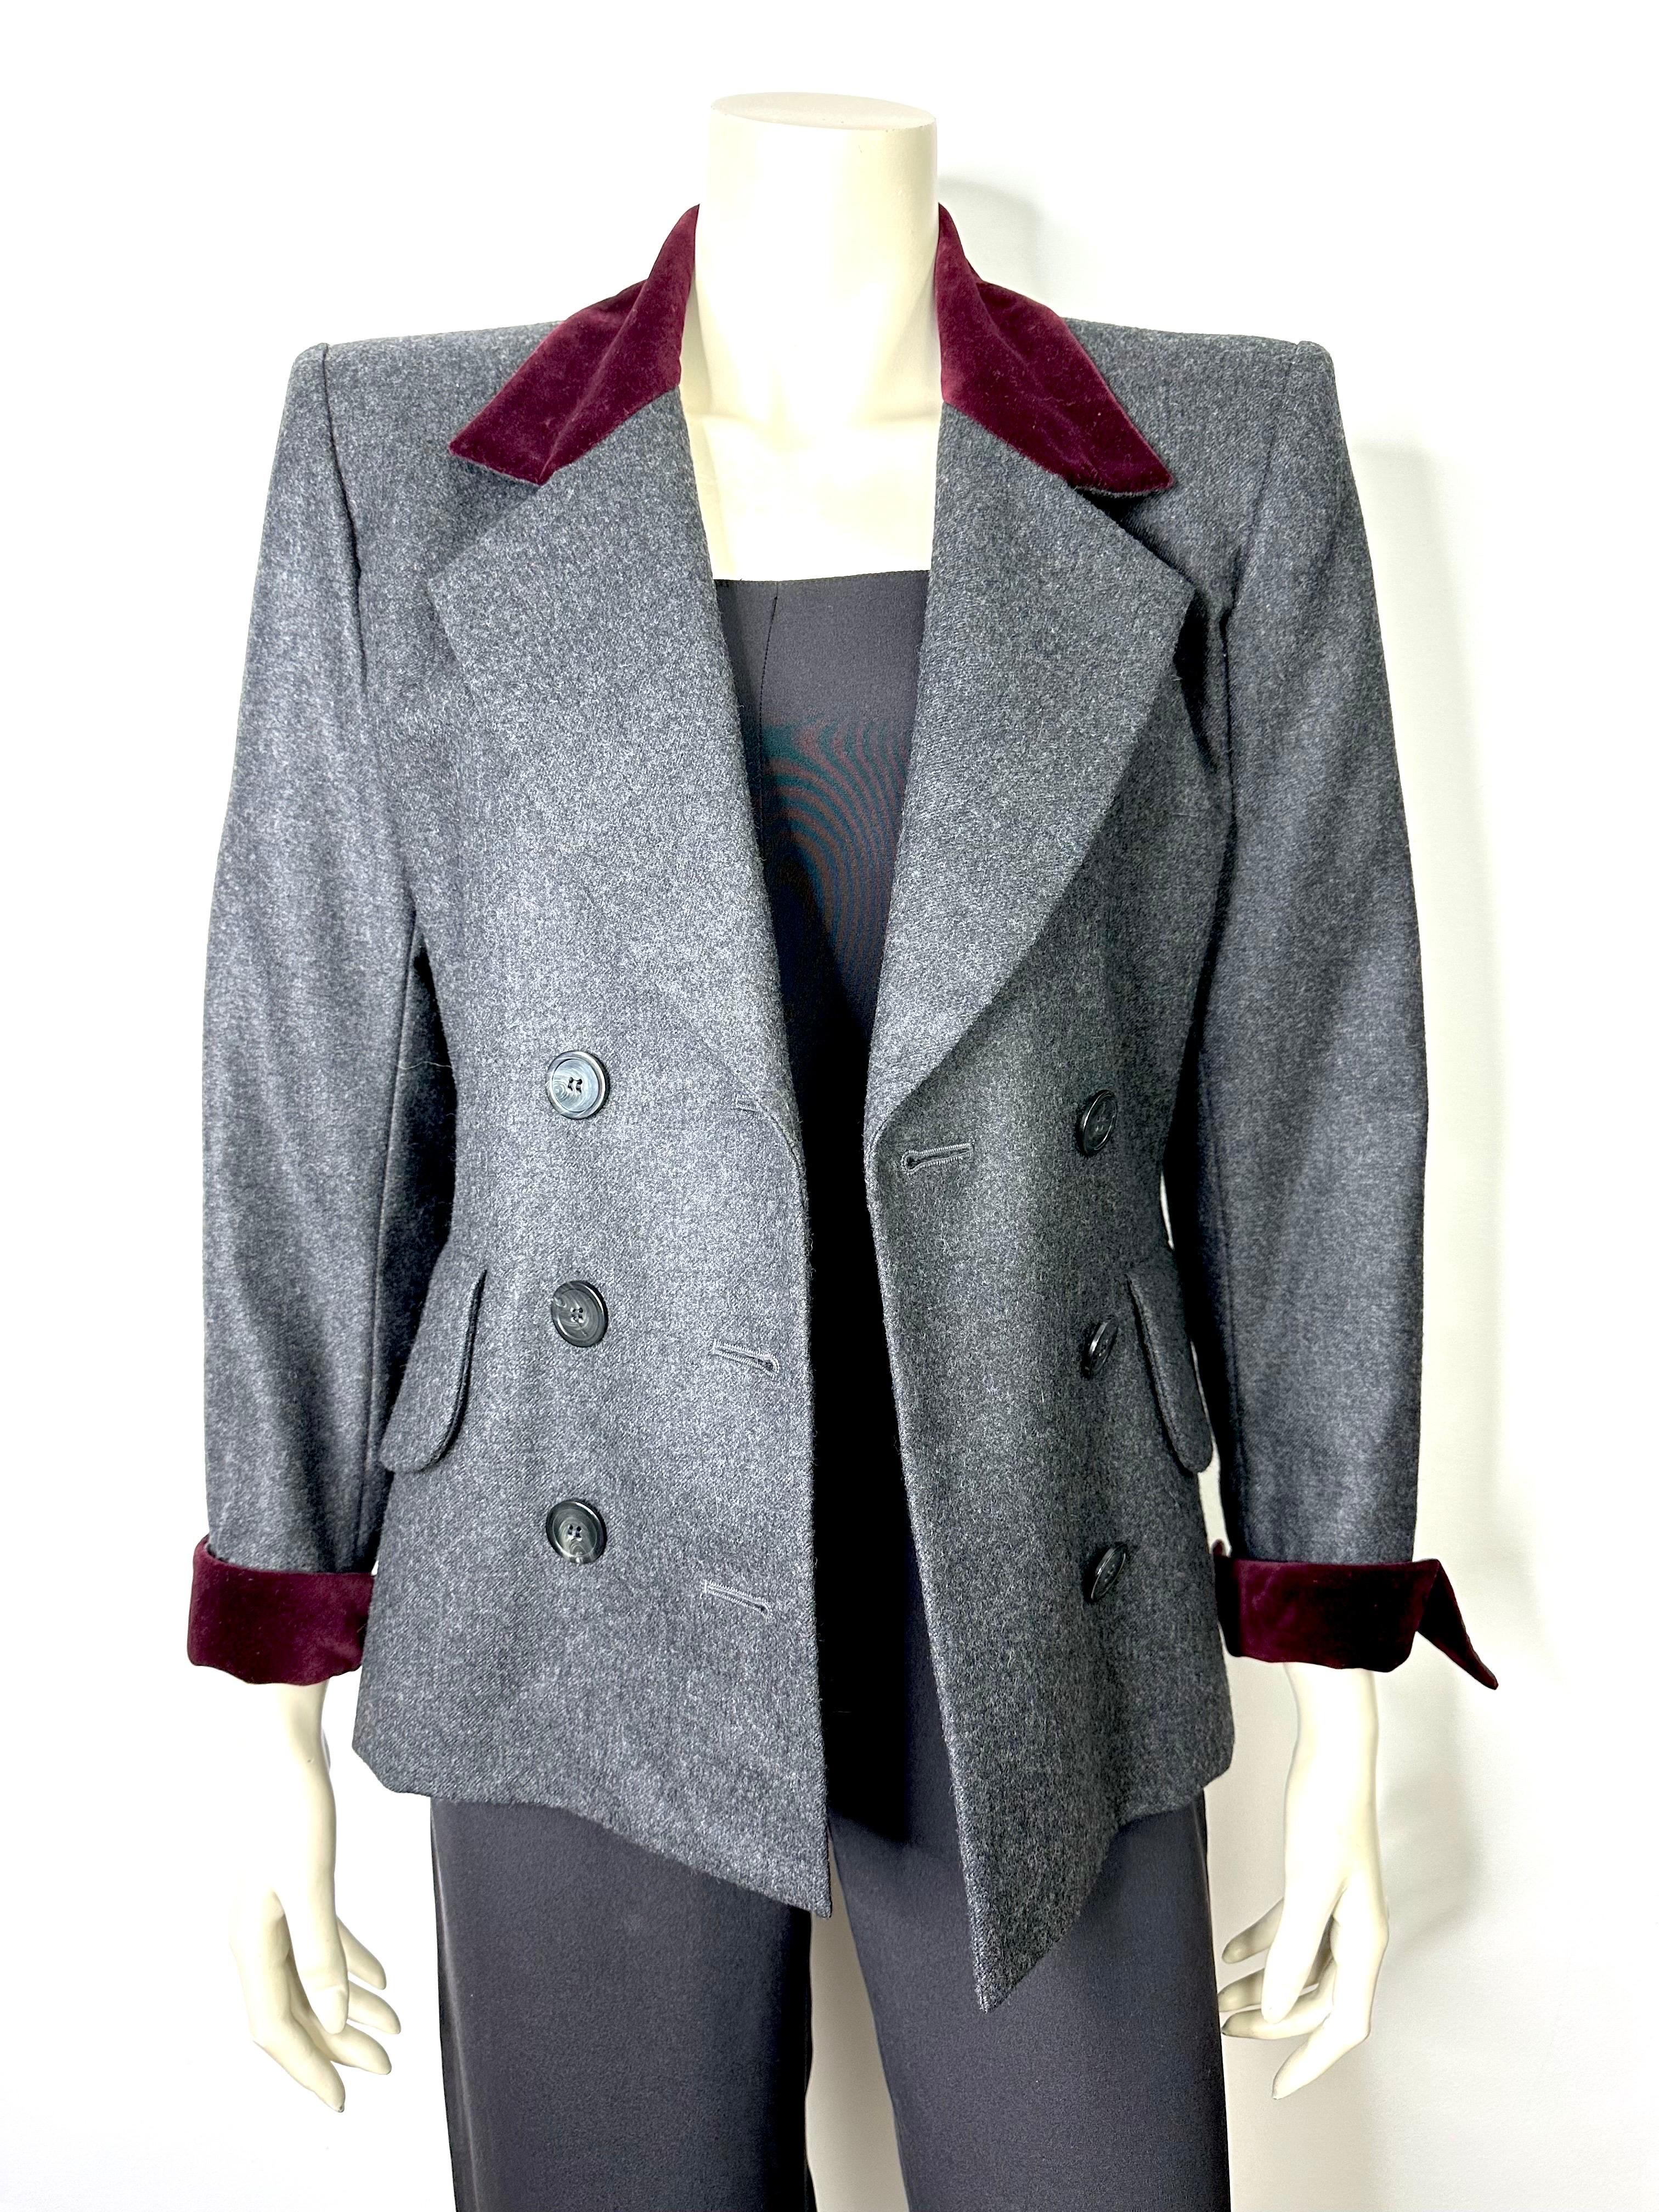 Vintage Yves saint Laurent grey wool blazer from 1990 For Sale 7